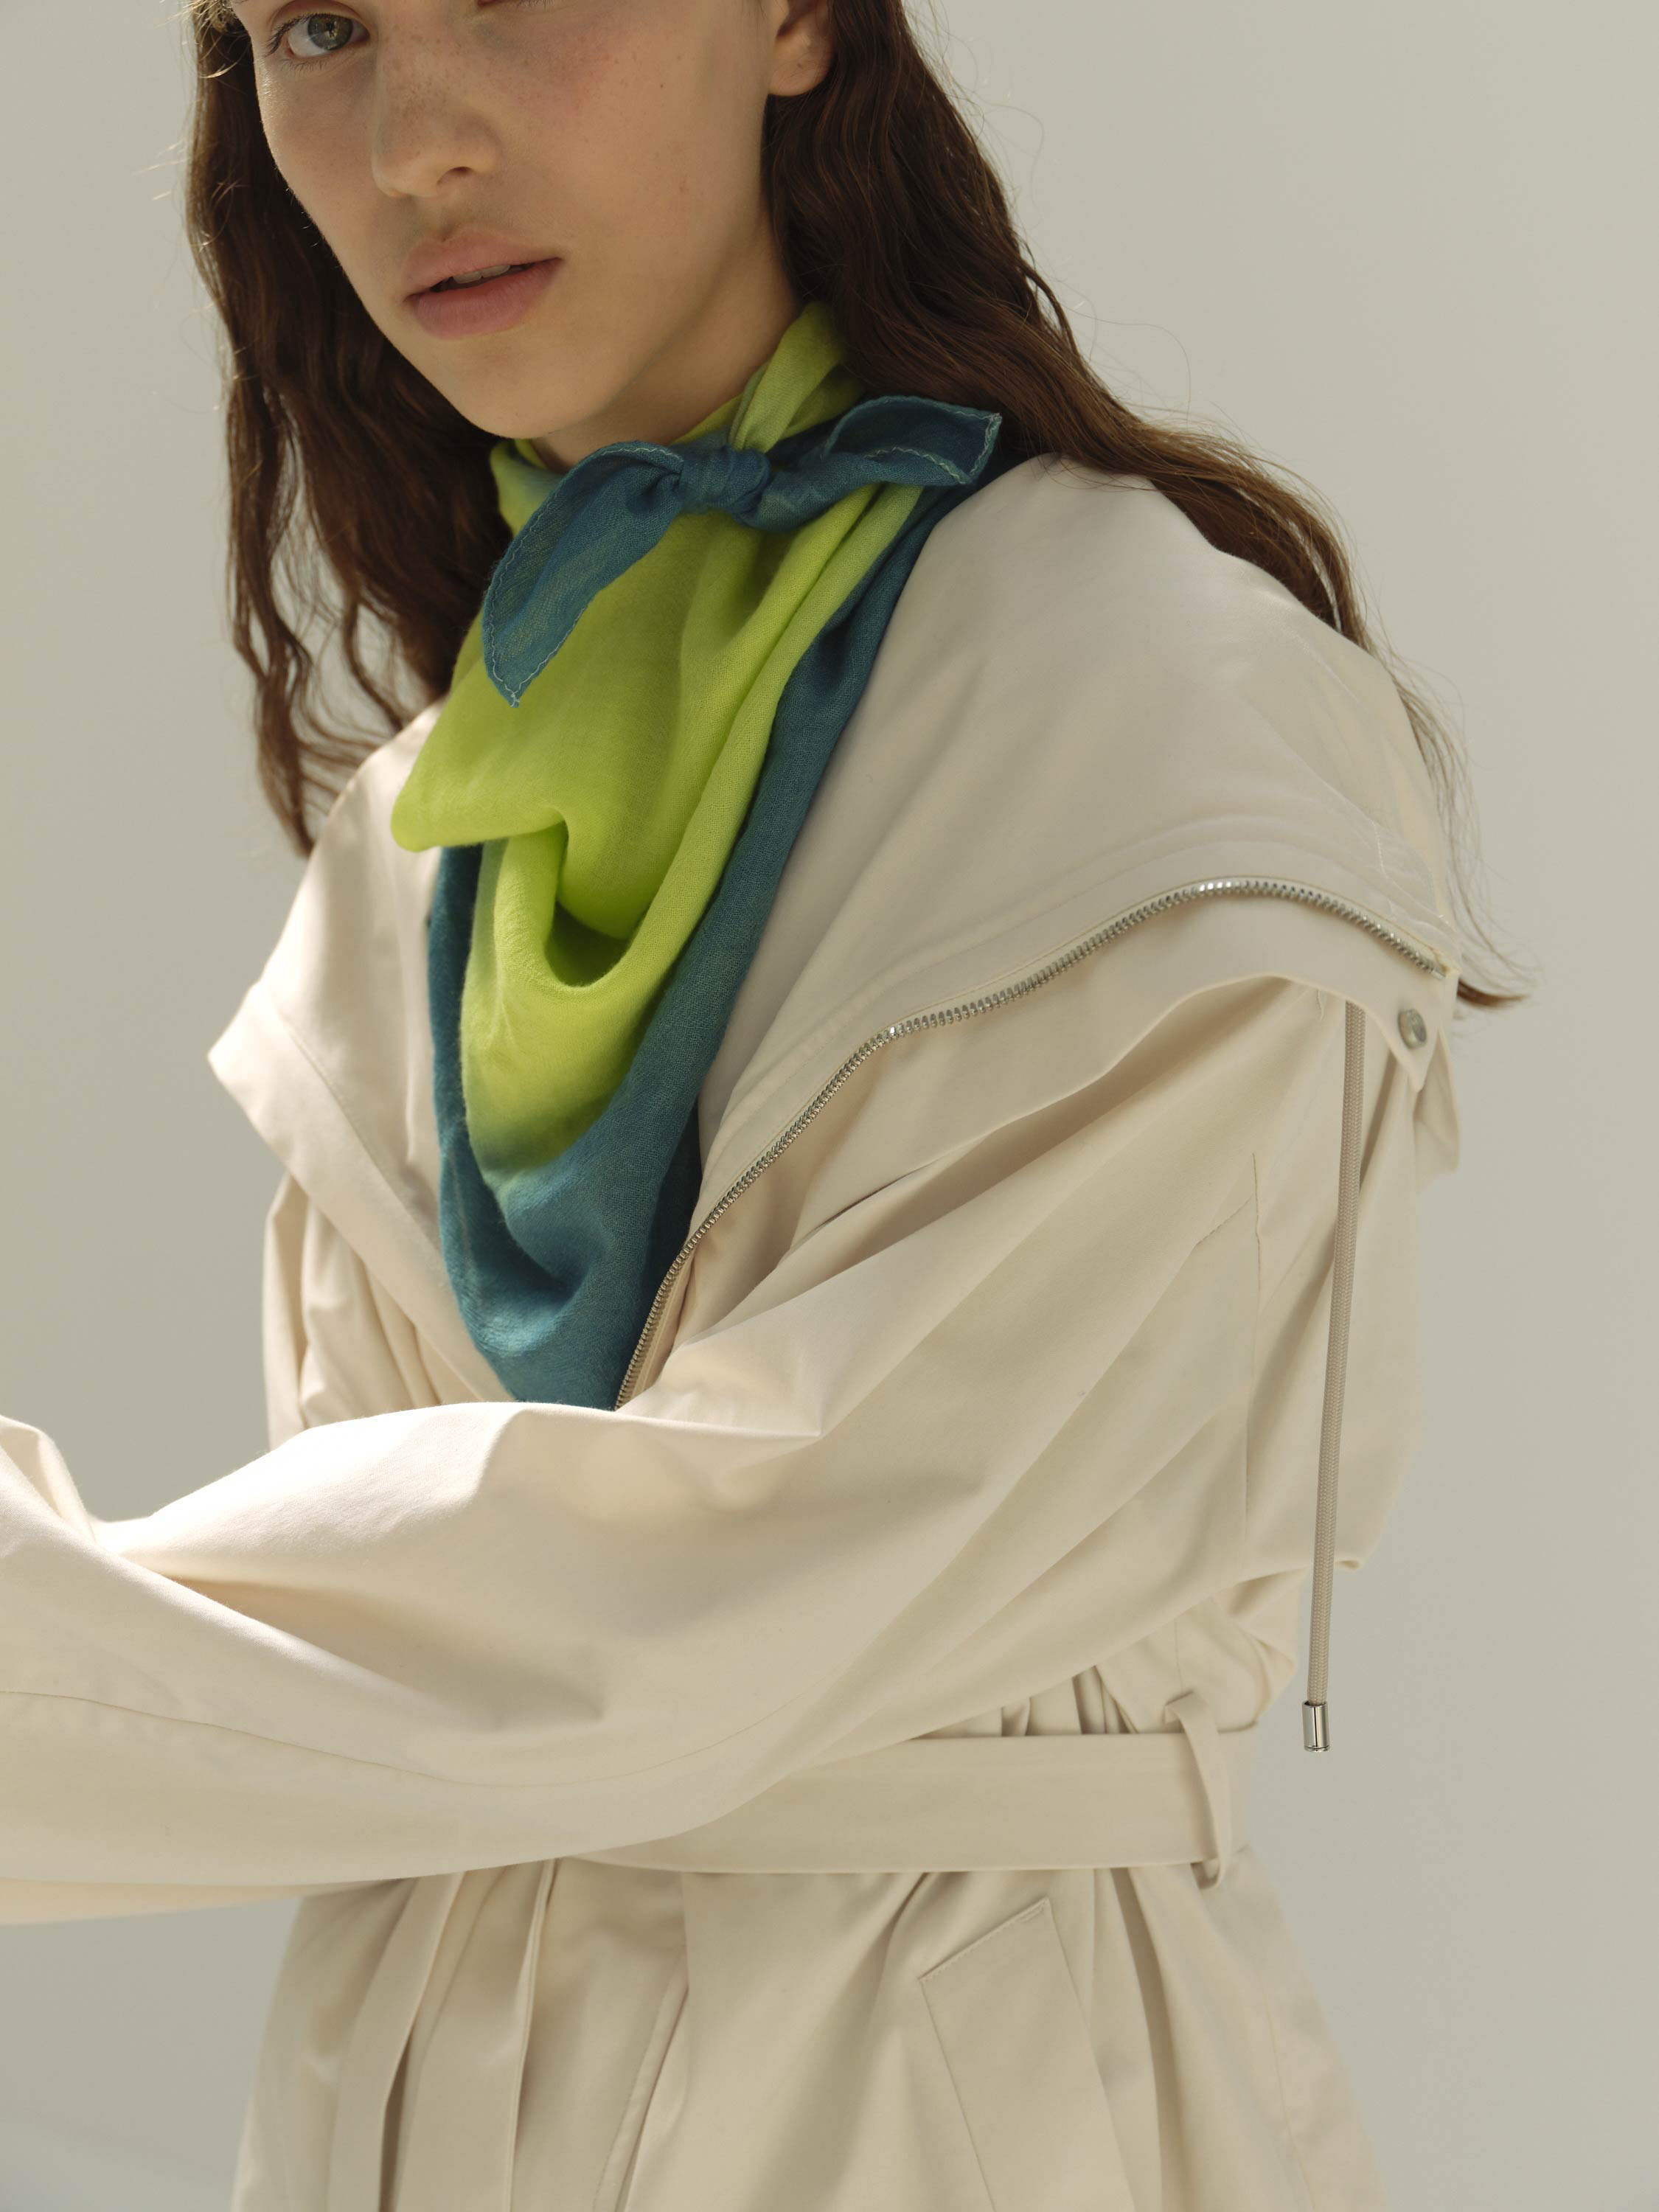 WHITE CASHMERE GAUZE SCARF 詳細画像 LIME YELLOW×TURQUOISE BLUE 1